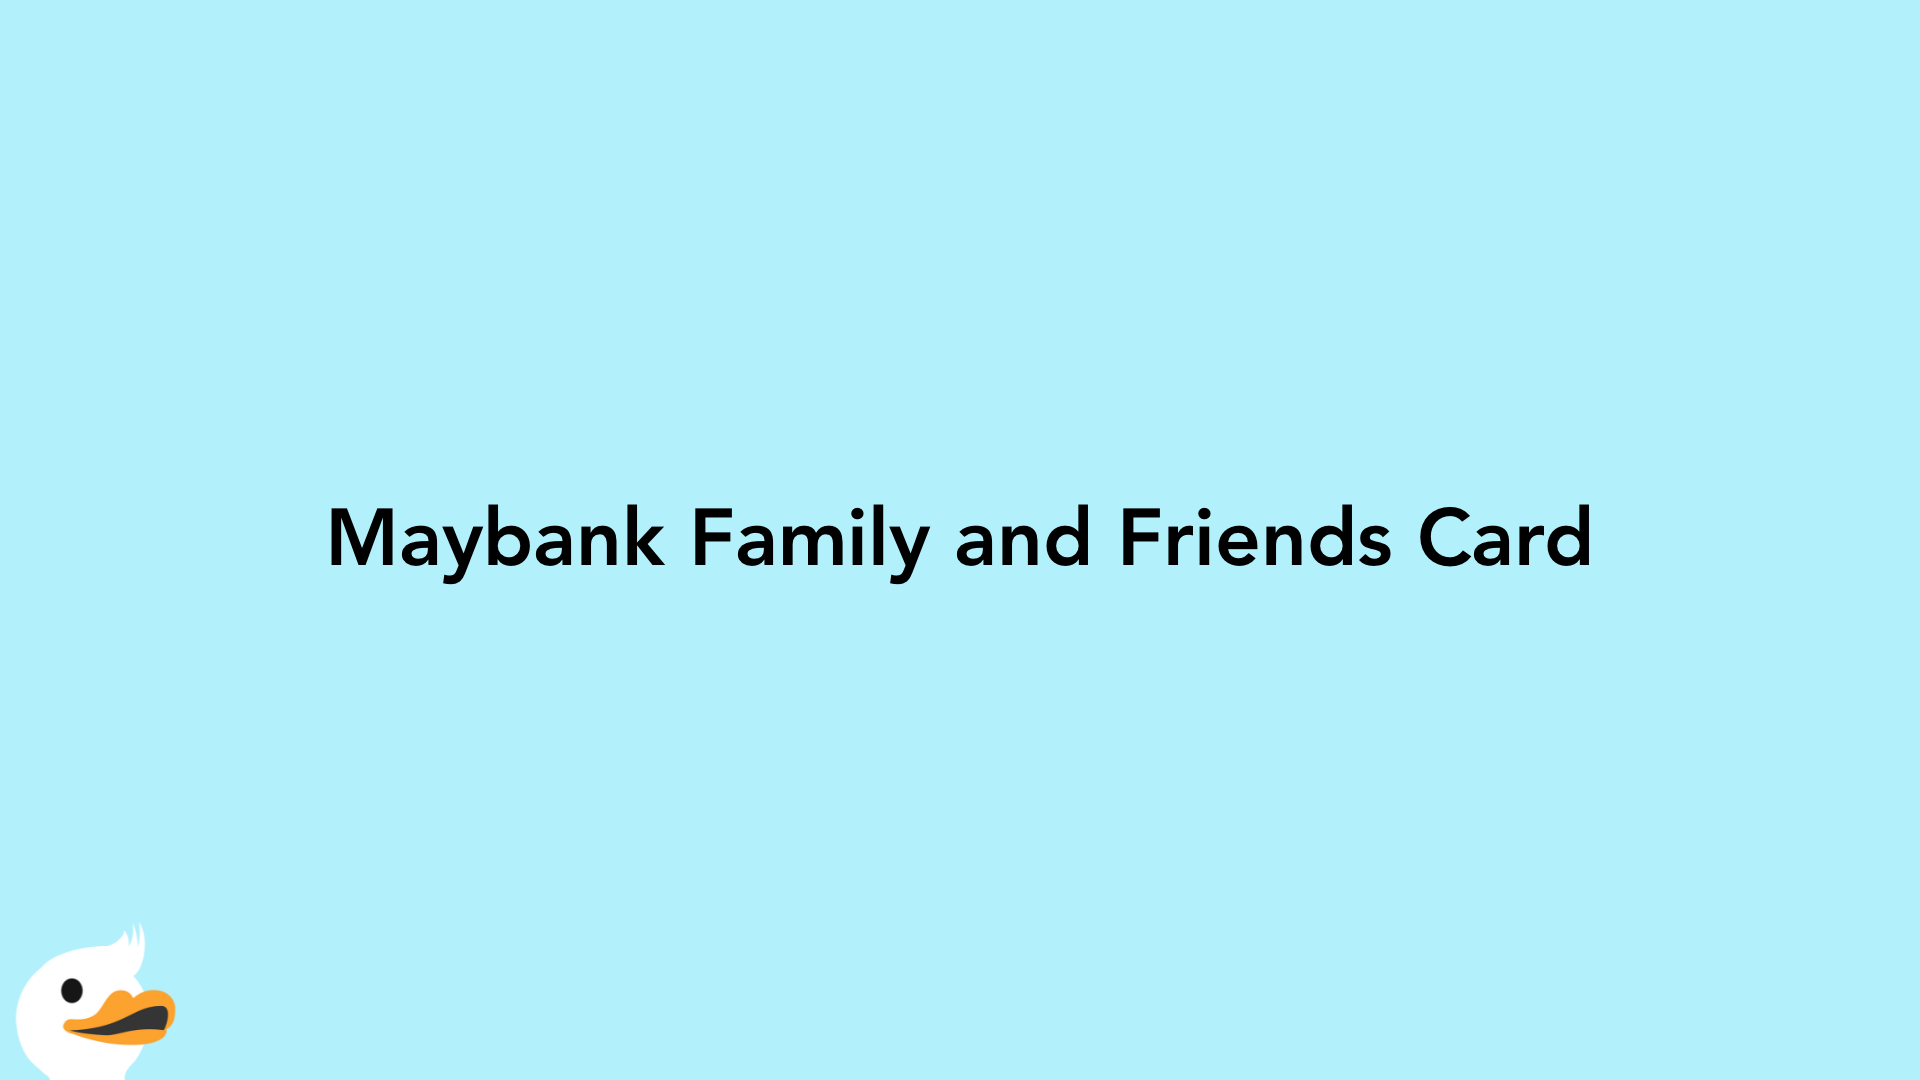 Maybank Family and Friends Card